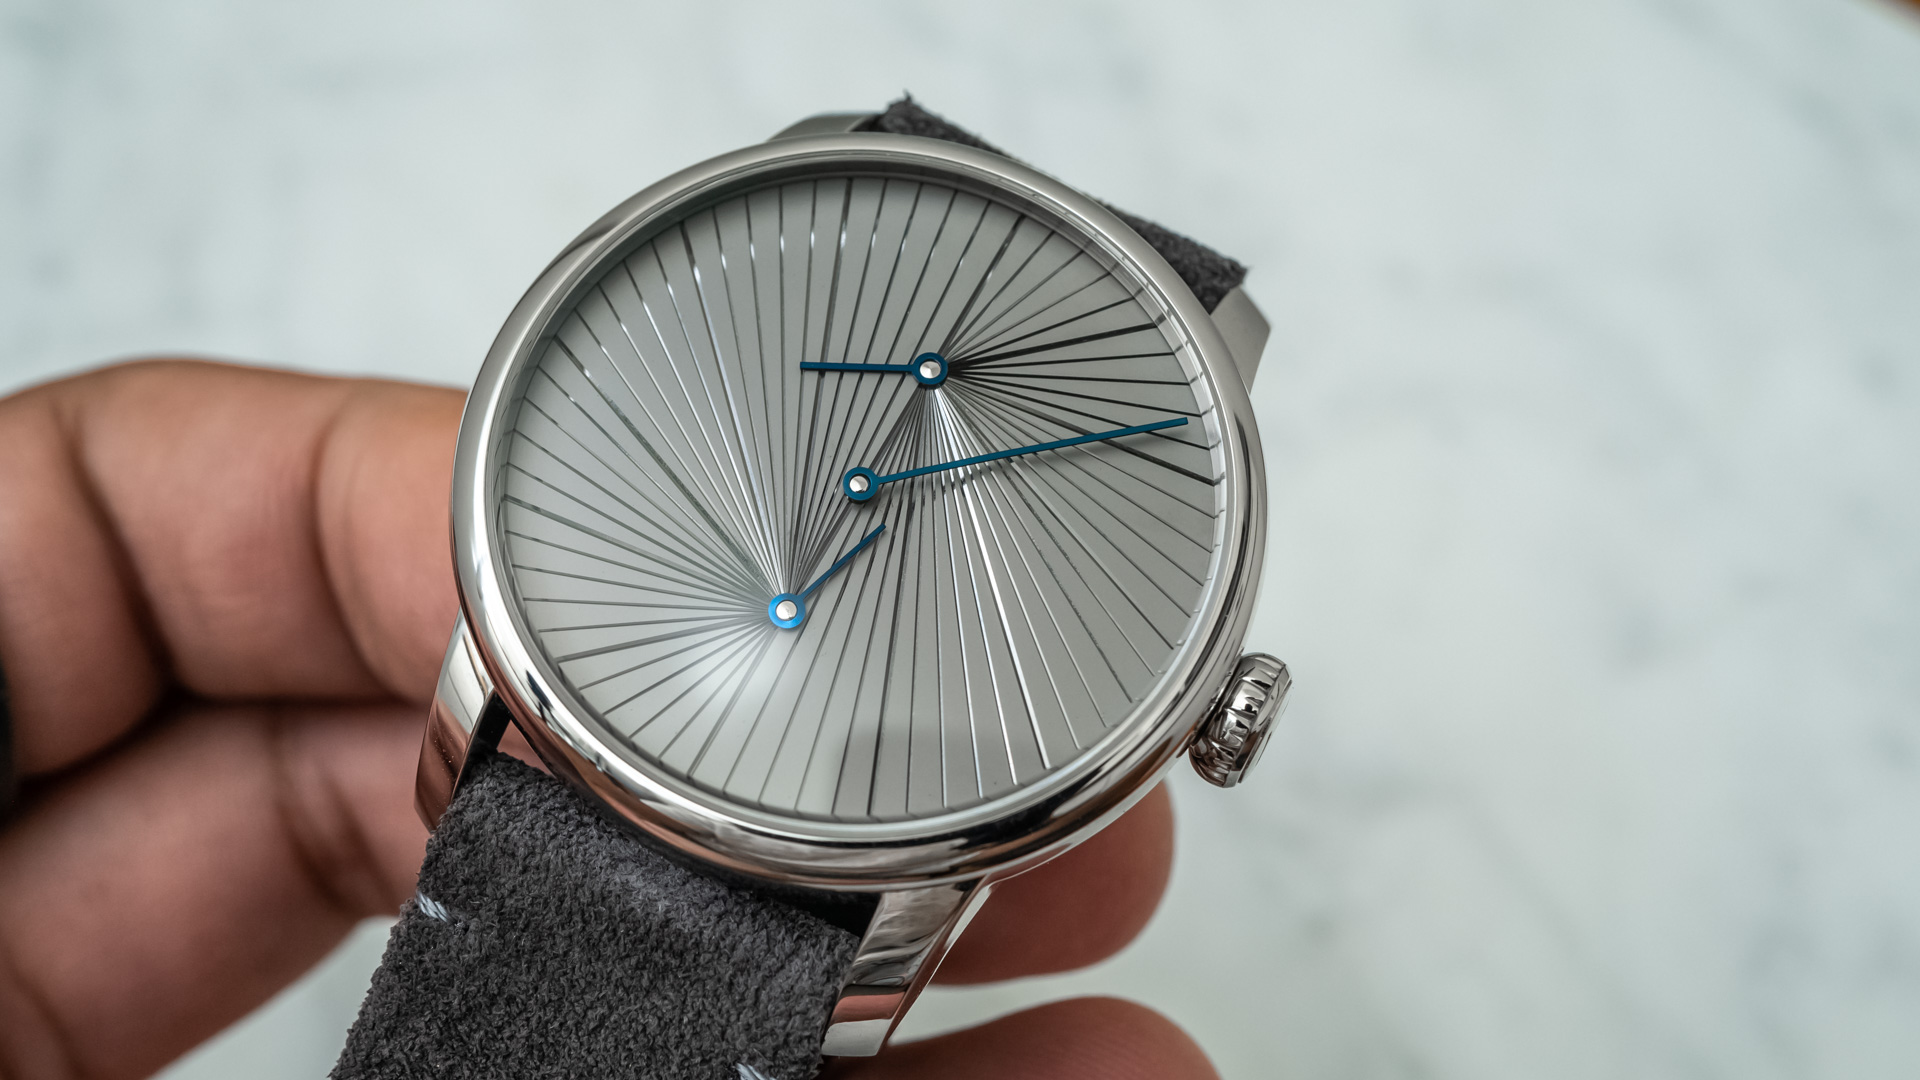 The Top 10 Best Selling Louis Erard Luxury Watches In 2021